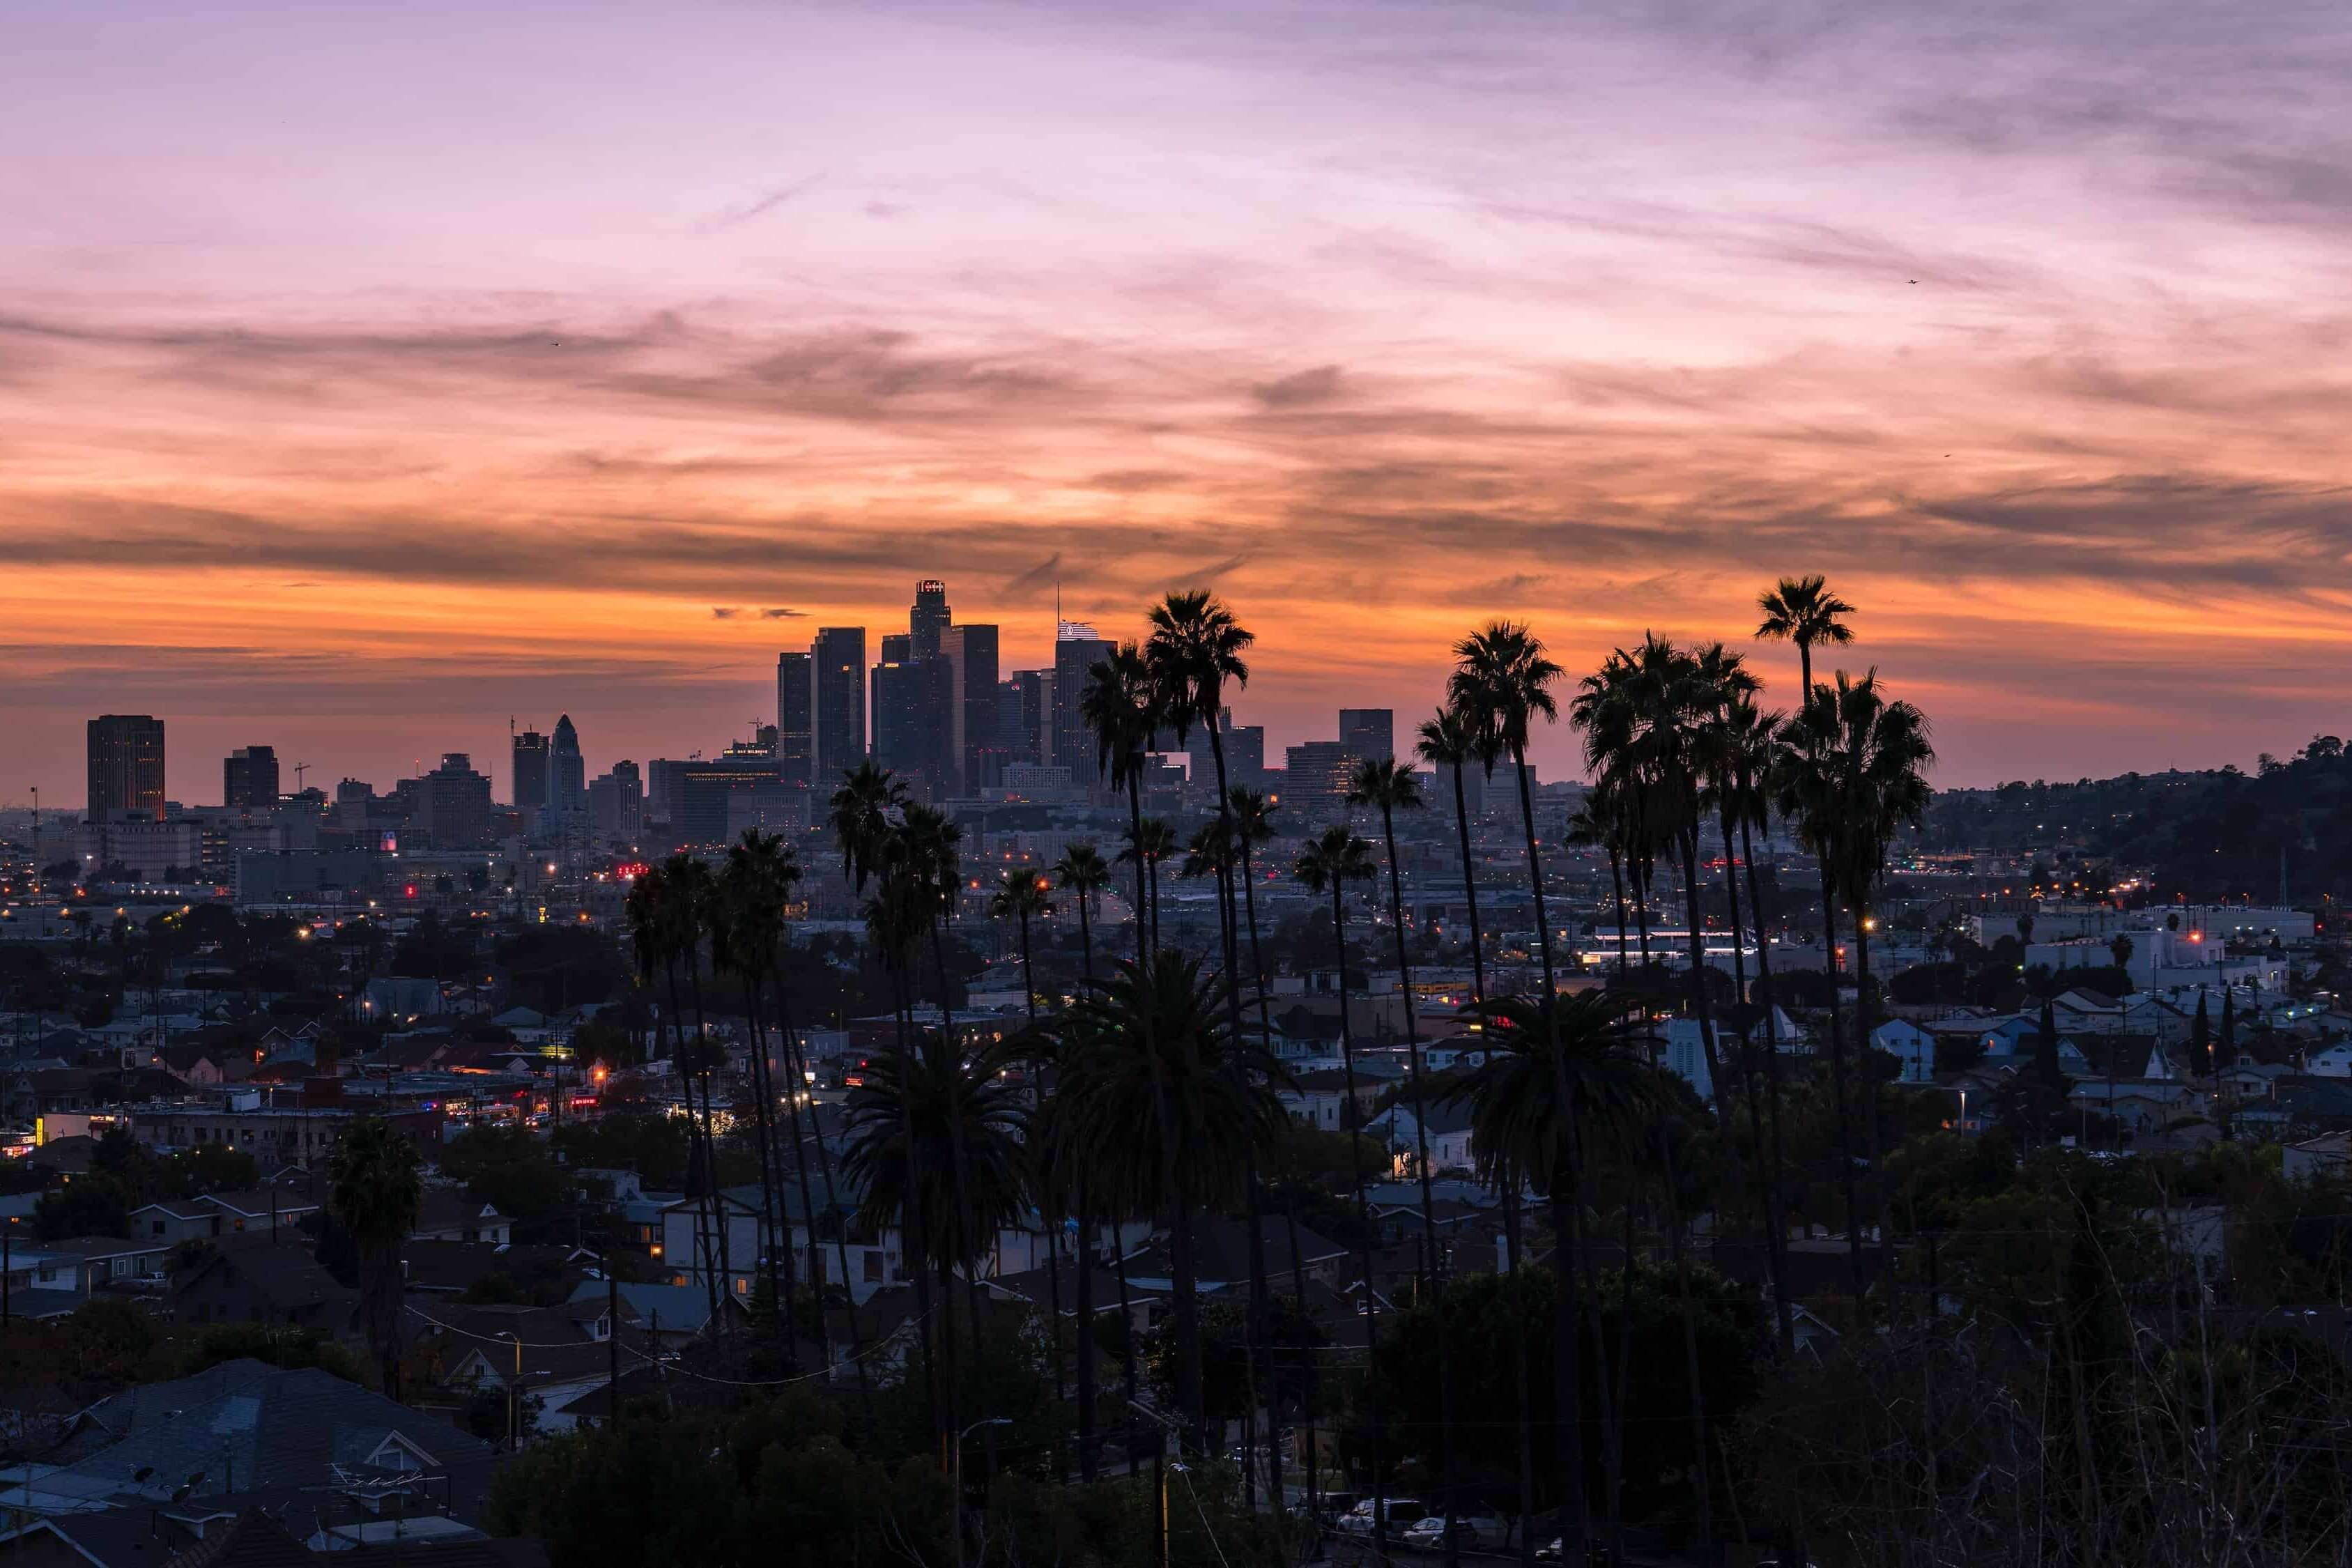 A cityscape with palm trees and a sunset in the background